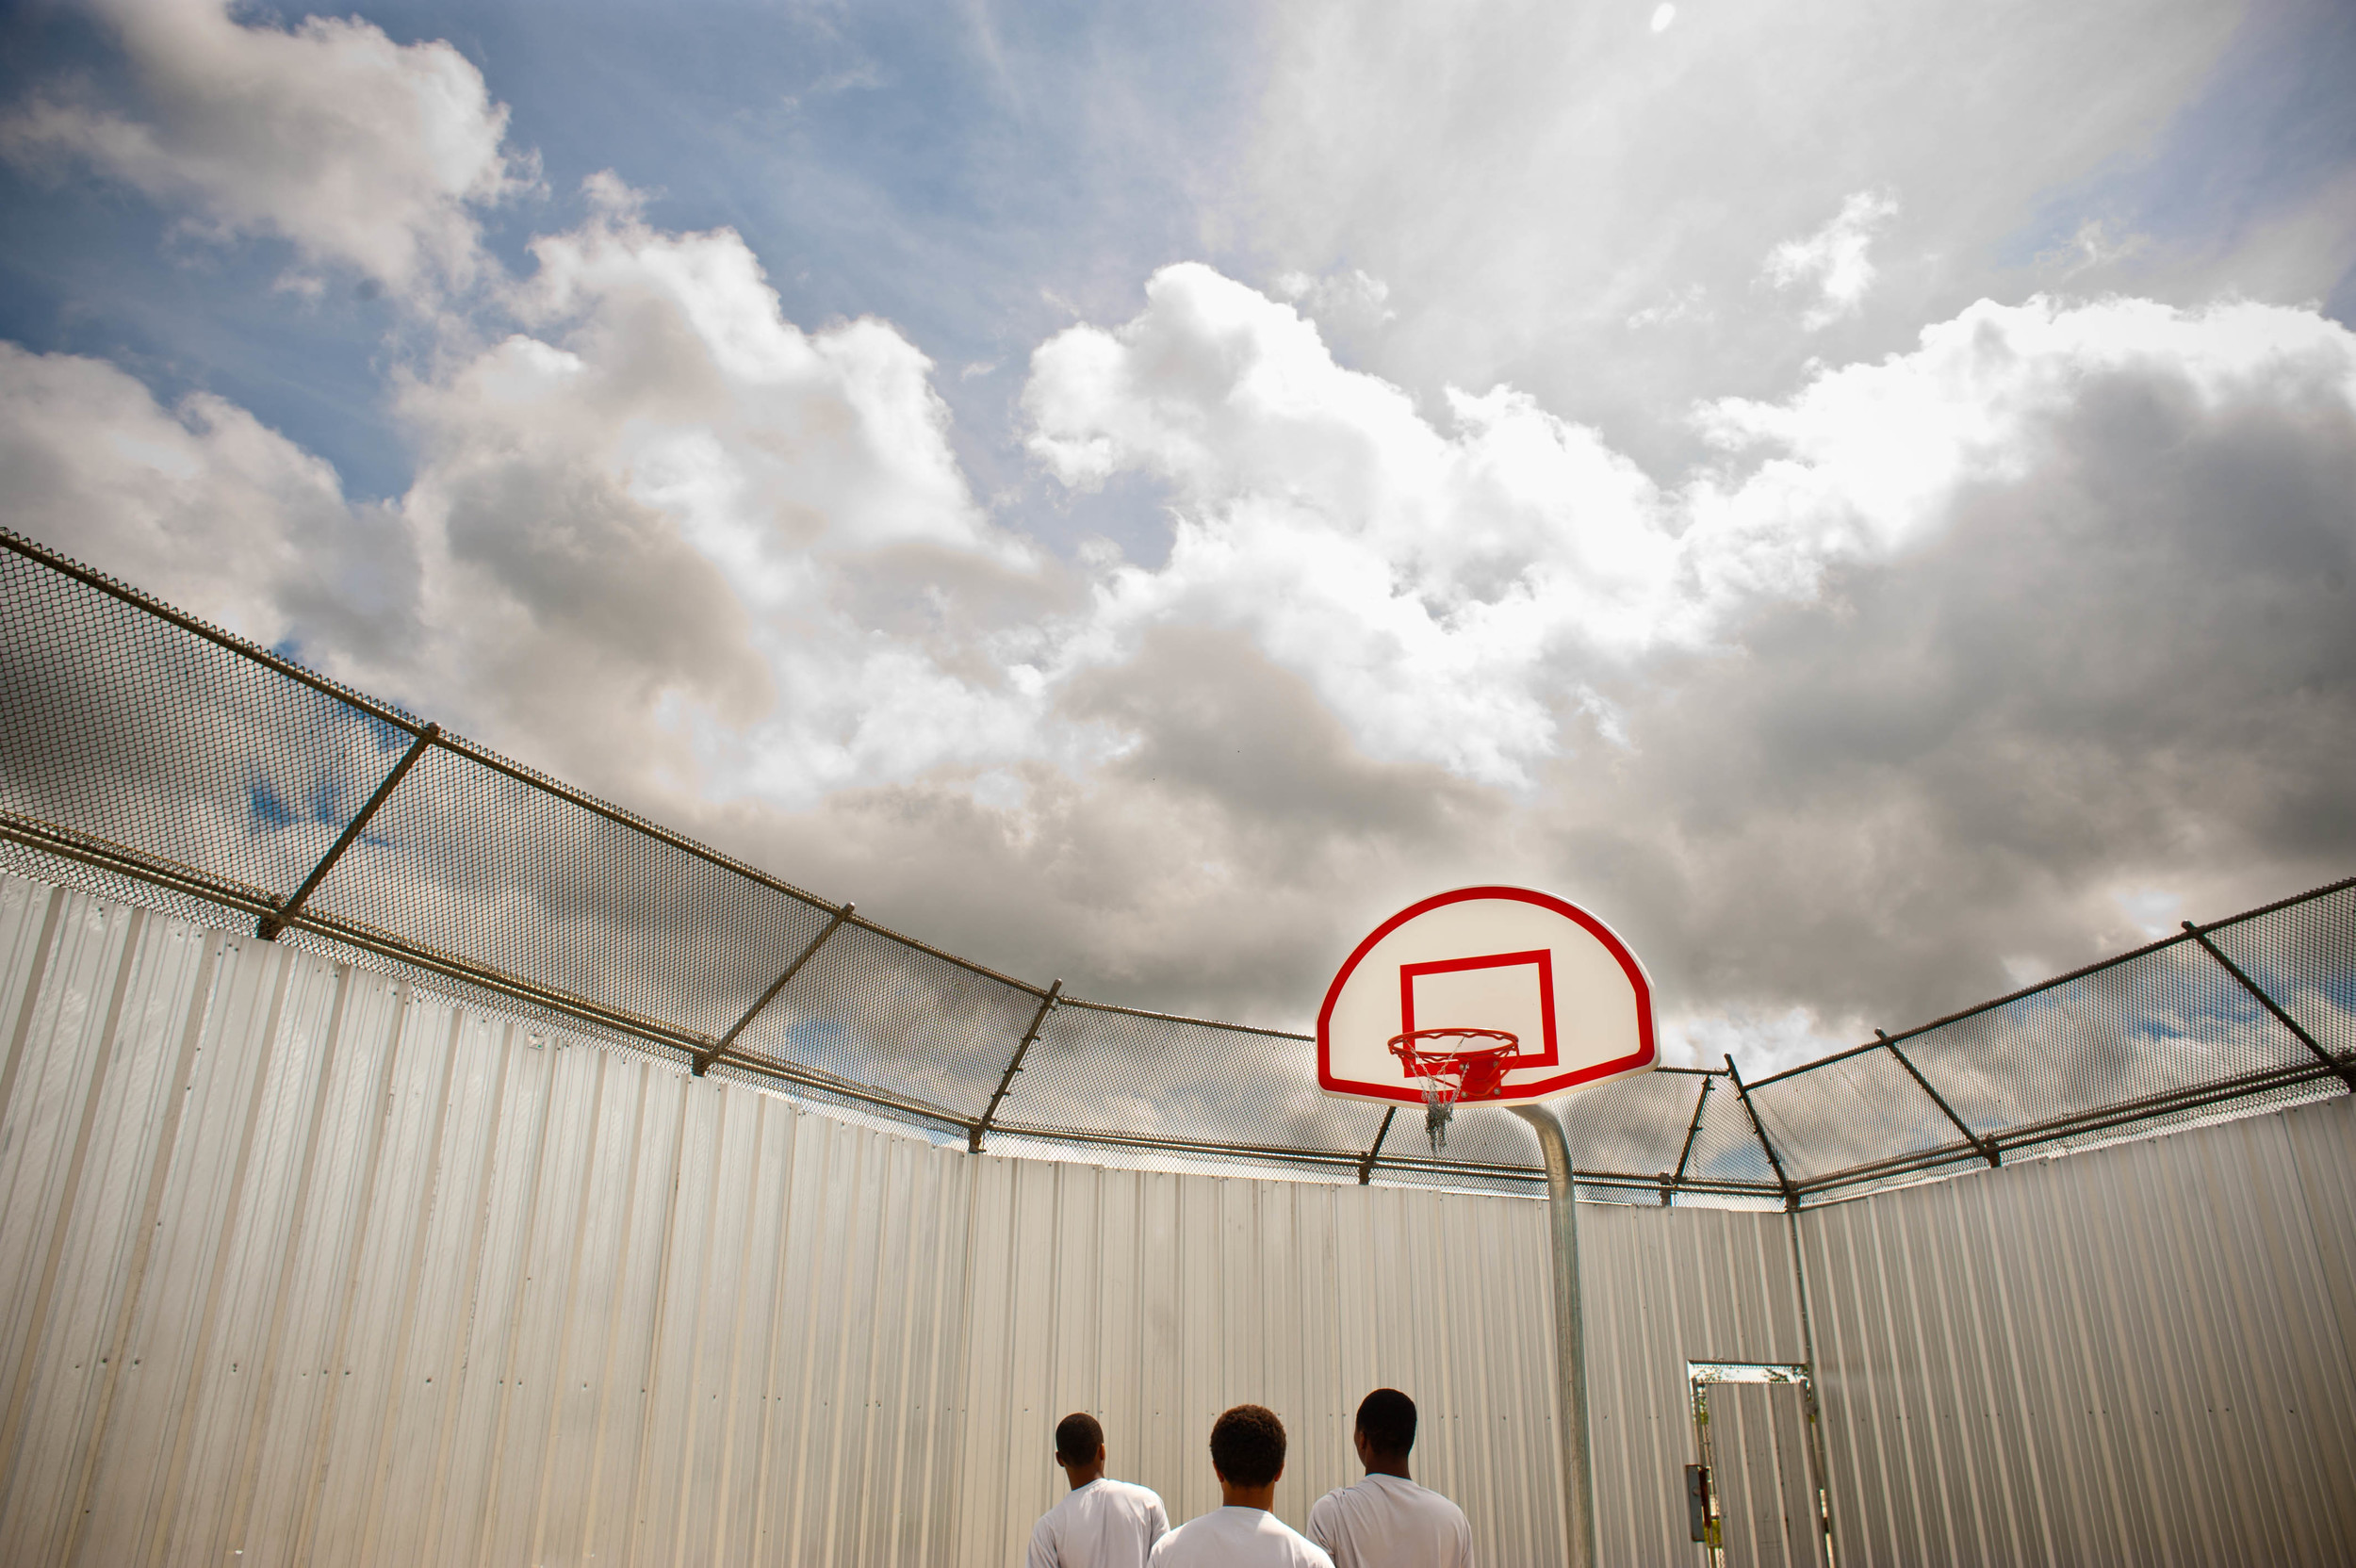    Teenage boys play basketball at the Youth Study Center juvenile detention facility in New Orleans, LA.  